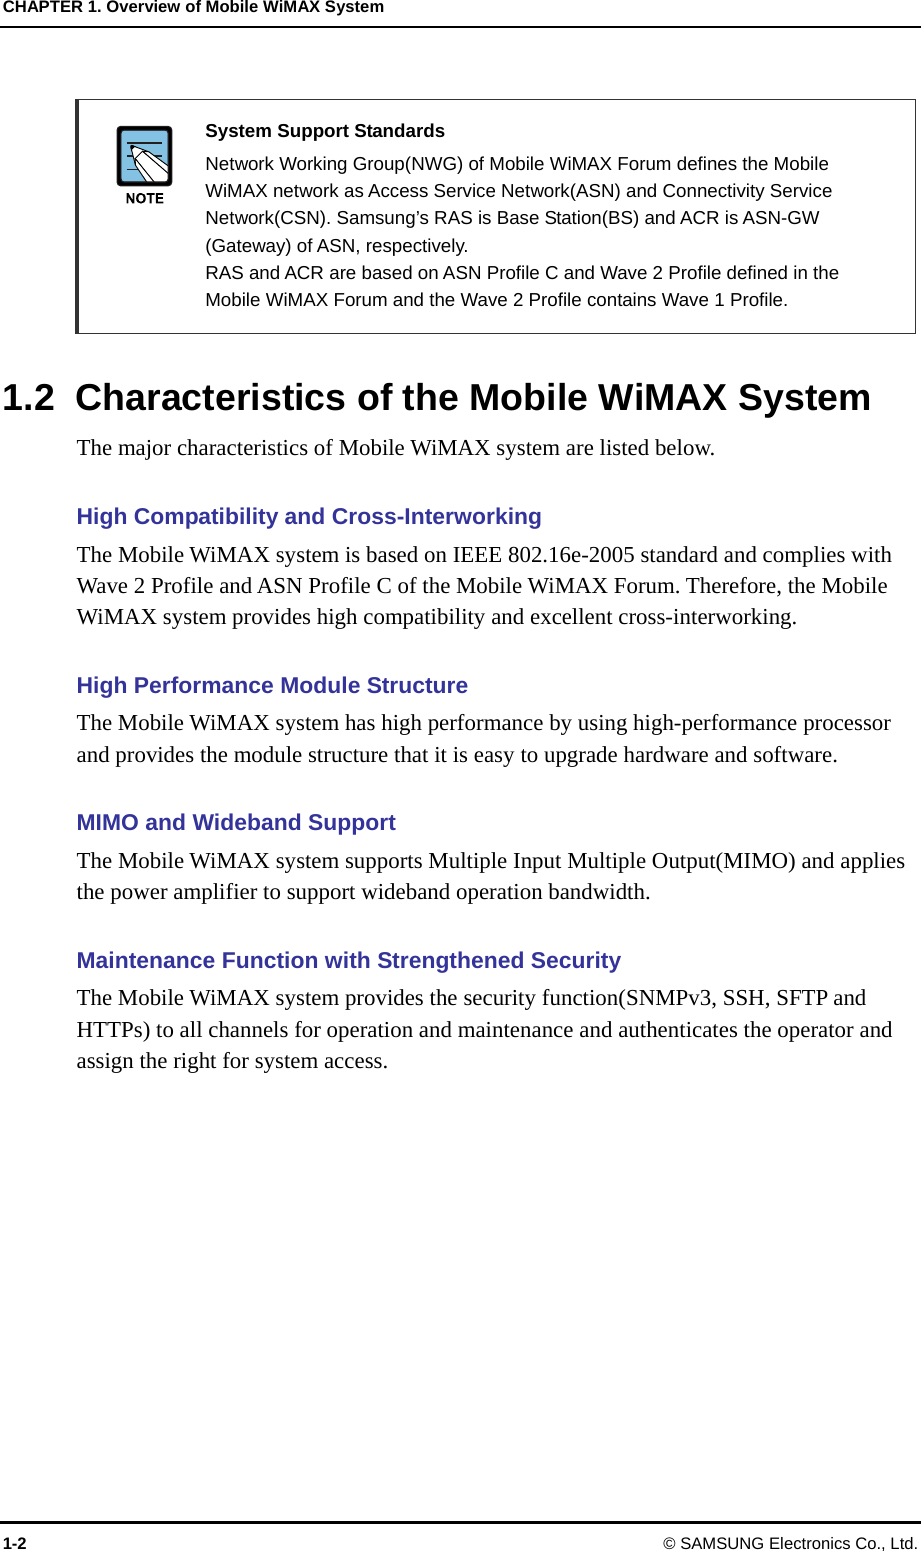 CHAPTER 1. Overview of Mobile WiMAX System 1-2 © SAMSUNG Electronics Co., Ltd.   System Support Standards   Network Working Group(NWG) of Mobile WiMAX Forum defines the Mobile WiMAX network as Access Service Network(ASN) and Connectivity Service Network(CSN). Samsung’s RAS is Base Station(BS) and ACR is ASN-GW (Gateway) of ASN, respectively.   RAS and ACR are based on ASN Profile C and Wave 2 Profile defined in the Mobile WiMAX Forum and the Wave 2 Profile contains Wave 1 Profile.  1.2  Characteristics of the Mobile WiMAX System The major characteristics of Mobile WiMAX system are listed below.    High Compatibility and Cross-Interworking The Mobile WiMAX system is based on IEEE 802.16e-2005 standard and complies with Wave 2 Profile and ASN Profile C of the Mobile WiMAX Forum. Therefore, the Mobile WiMAX system provides high compatibility and excellent cross-interworking.  High Performance Module Structure The Mobile WiMAX system has high performance by using high-performance processor and provides the module structure that it is easy to upgrade hardware and software.  MIMO and Wideband Support The Mobile WiMAX system supports Multiple Input Multiple Output(MIMO) and applies the power amplifier to support wideband operation bandwidth.  Maintenance Function with Strengthened Security The Mobile WiMAX system provides the security function(SNMPv3, SSH, SFTP and HTTPs) to all channels for operation and maintenance and authenticates the operator and assign the right for system access.  